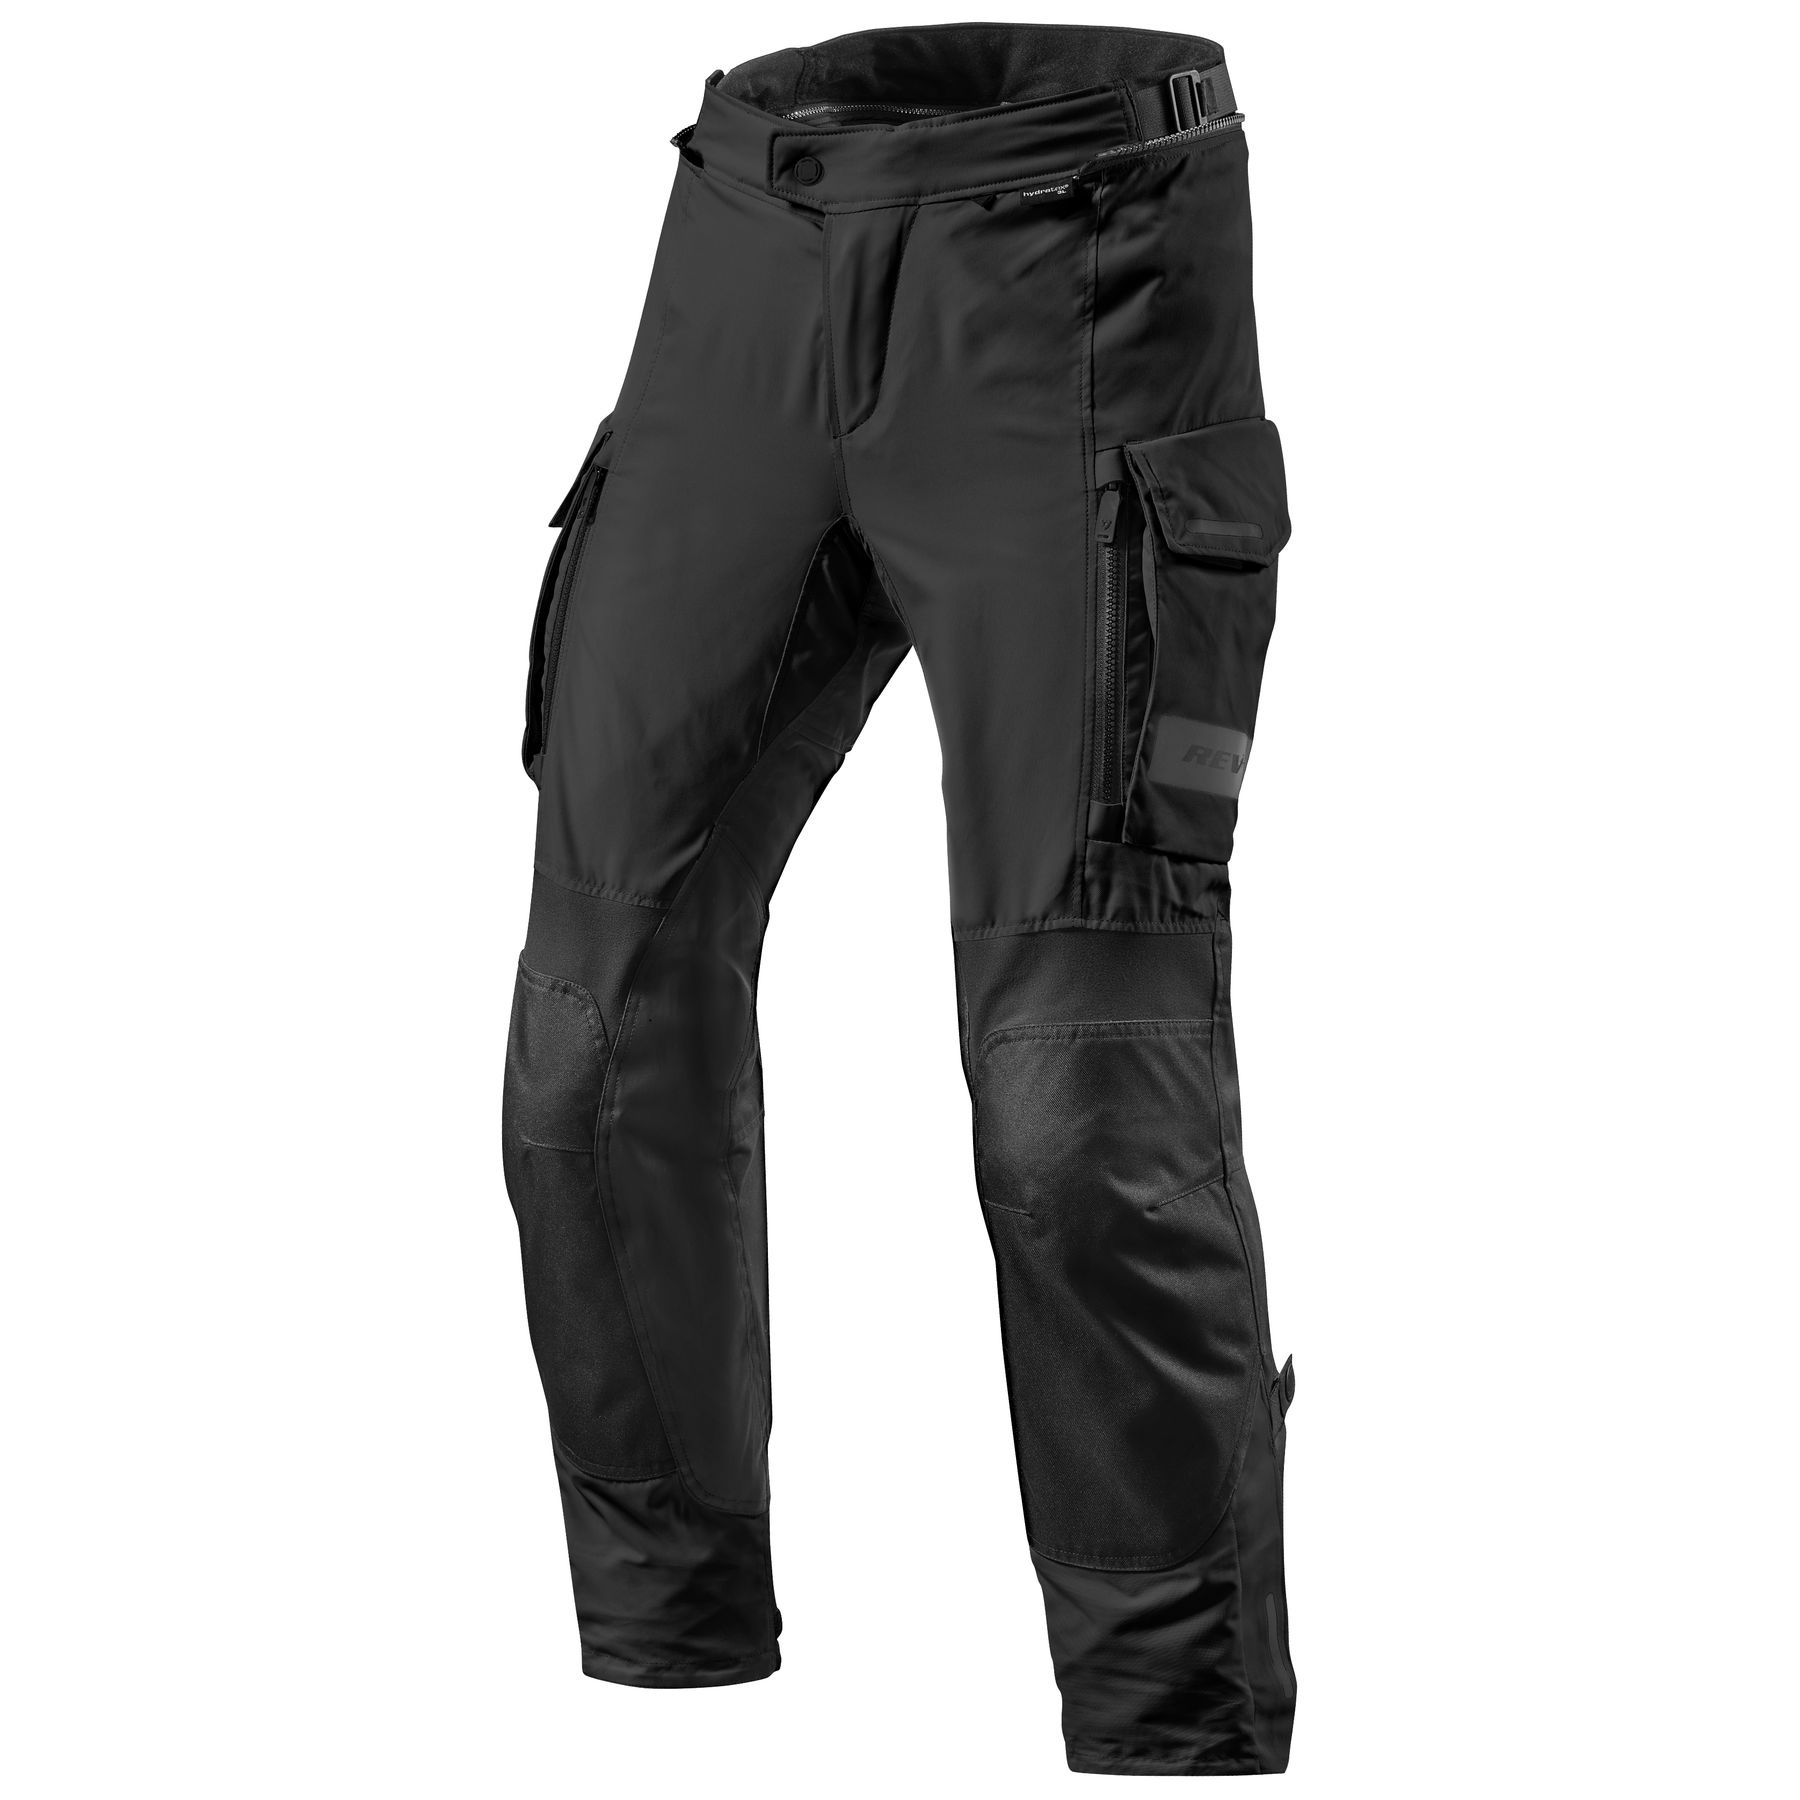 Motorcycle Pants Cruiser Touring Riding Protective Armor Trouser Pants Black 